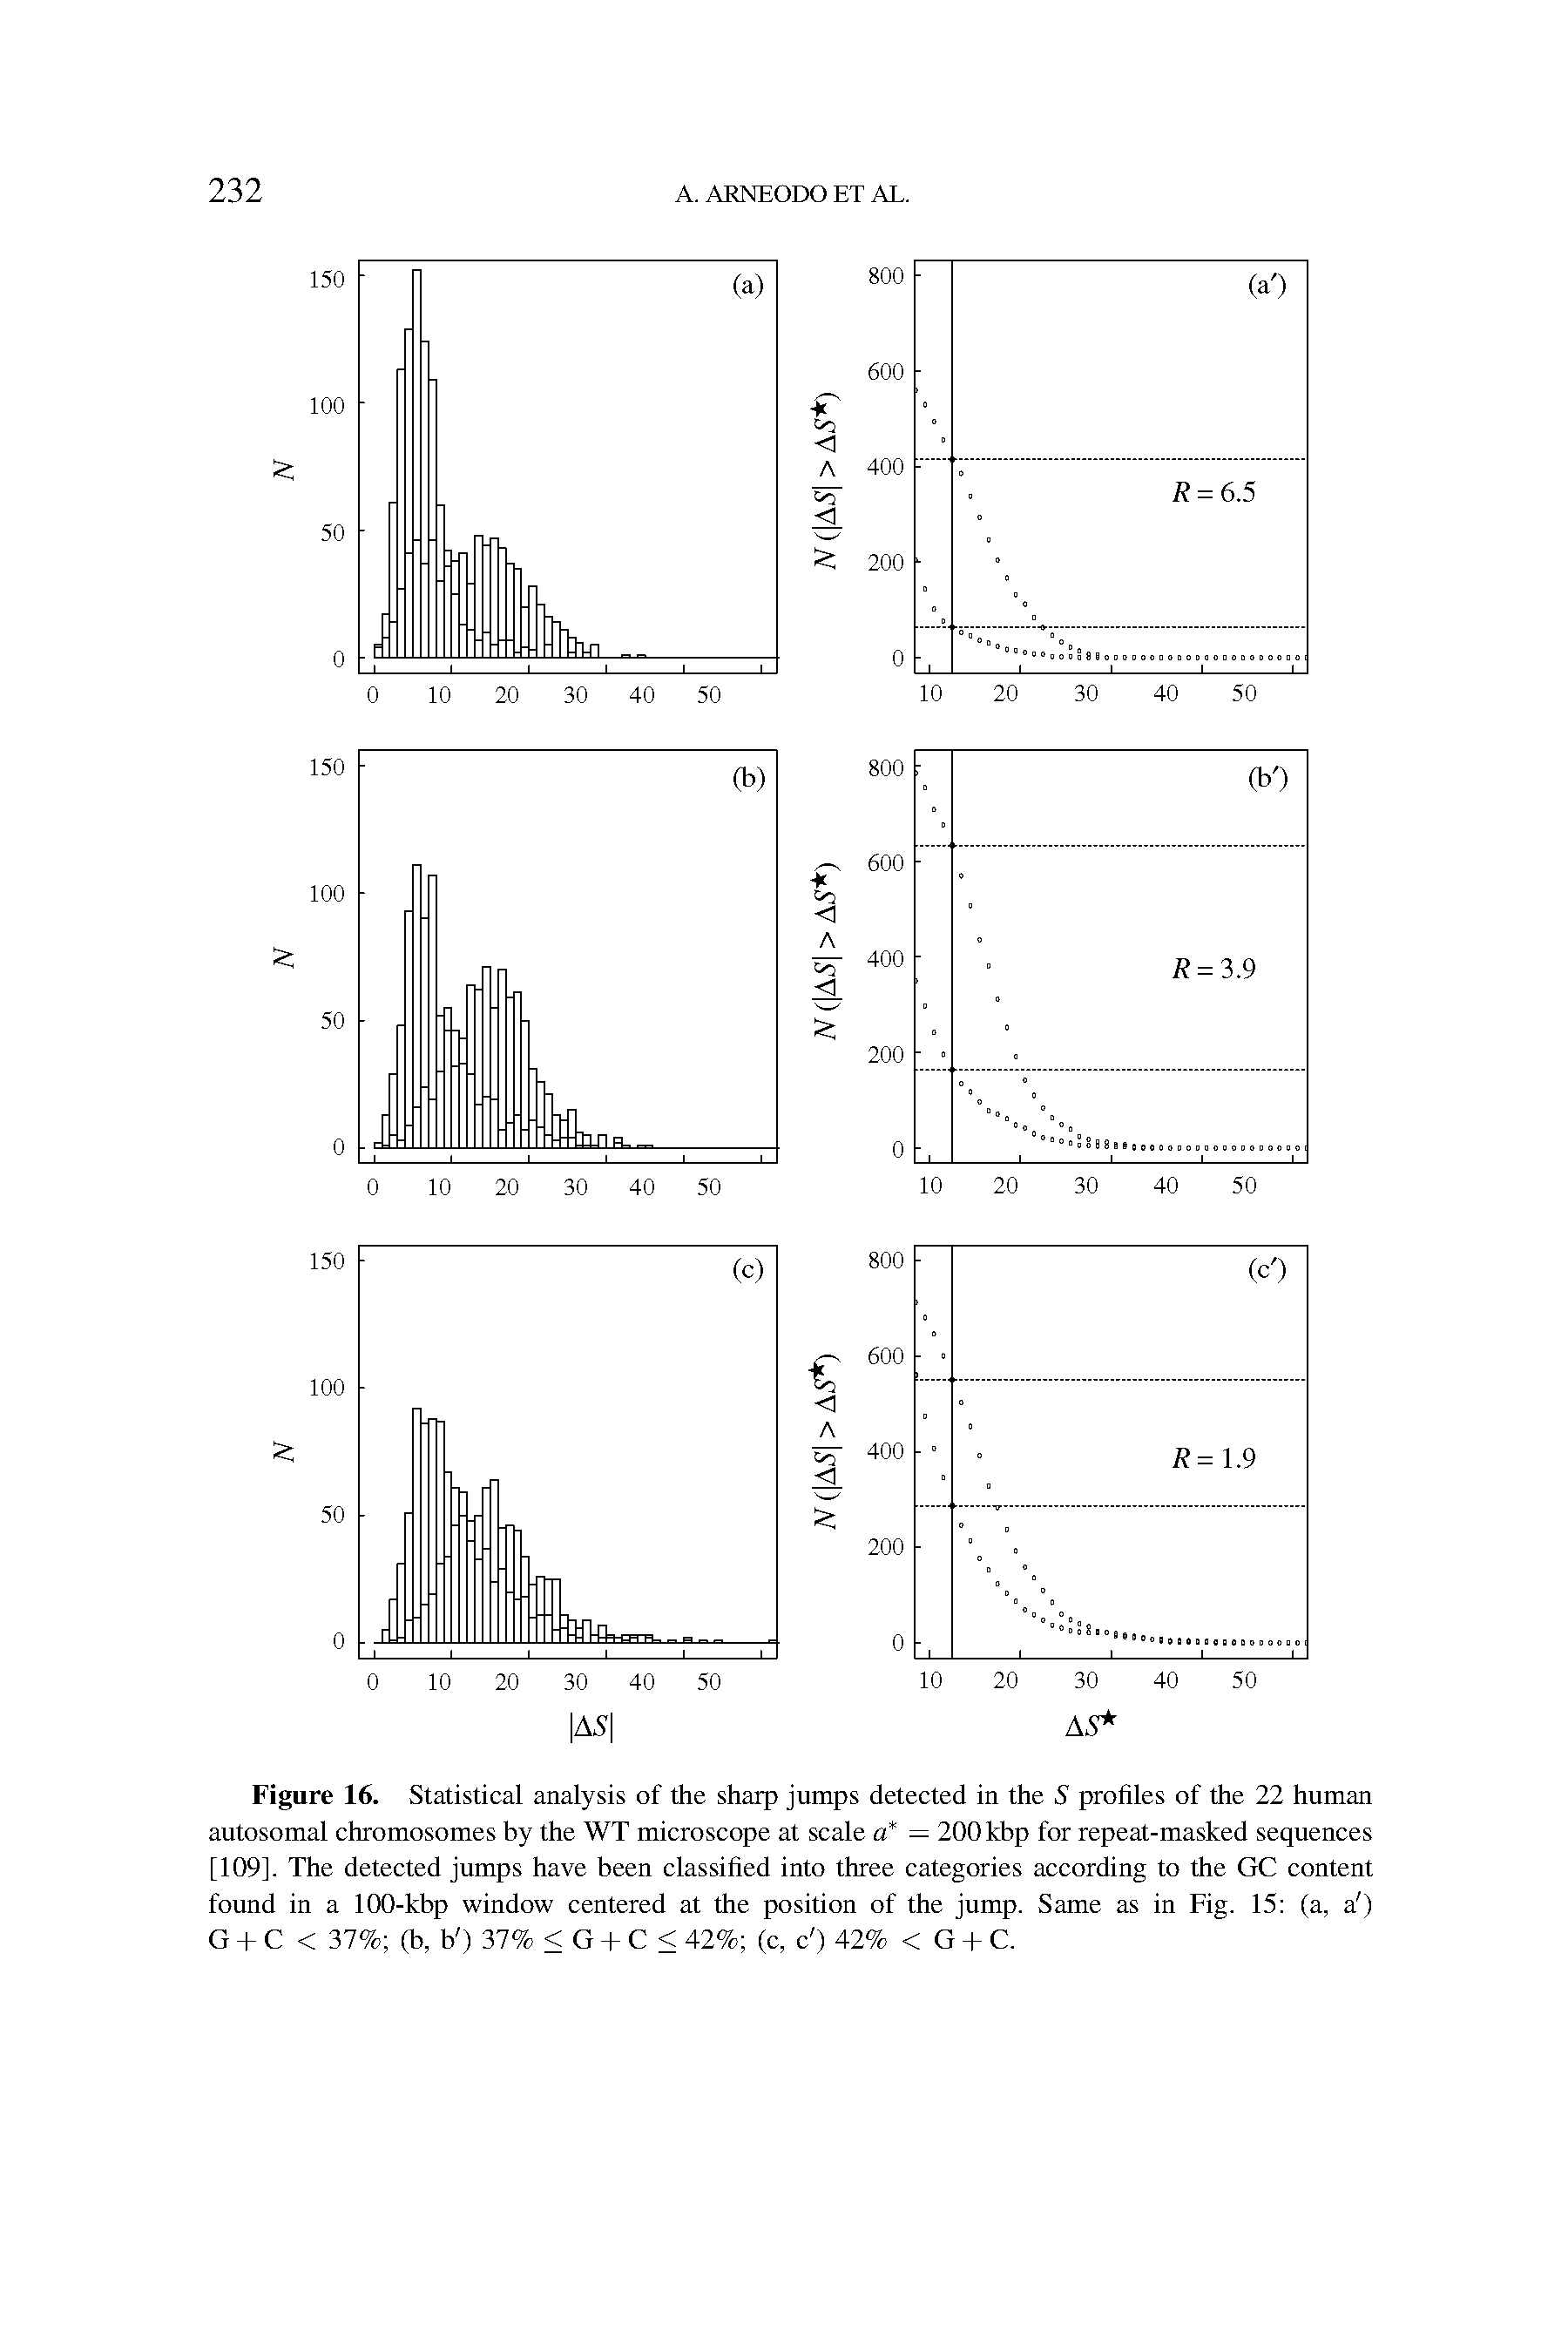 Figure 16. Statistical analysis of the sharp jumps detected in the S profiles of the 22 human autosomal chromosomes by the WT microscope at scale a — 200 kbp for repeat-masked sequences [109]. The detected jumps have been classified into three categories according to the GC content found in a 100-kbp window centered at the position of the jump. Same as in Fig. 15 (a, a )...